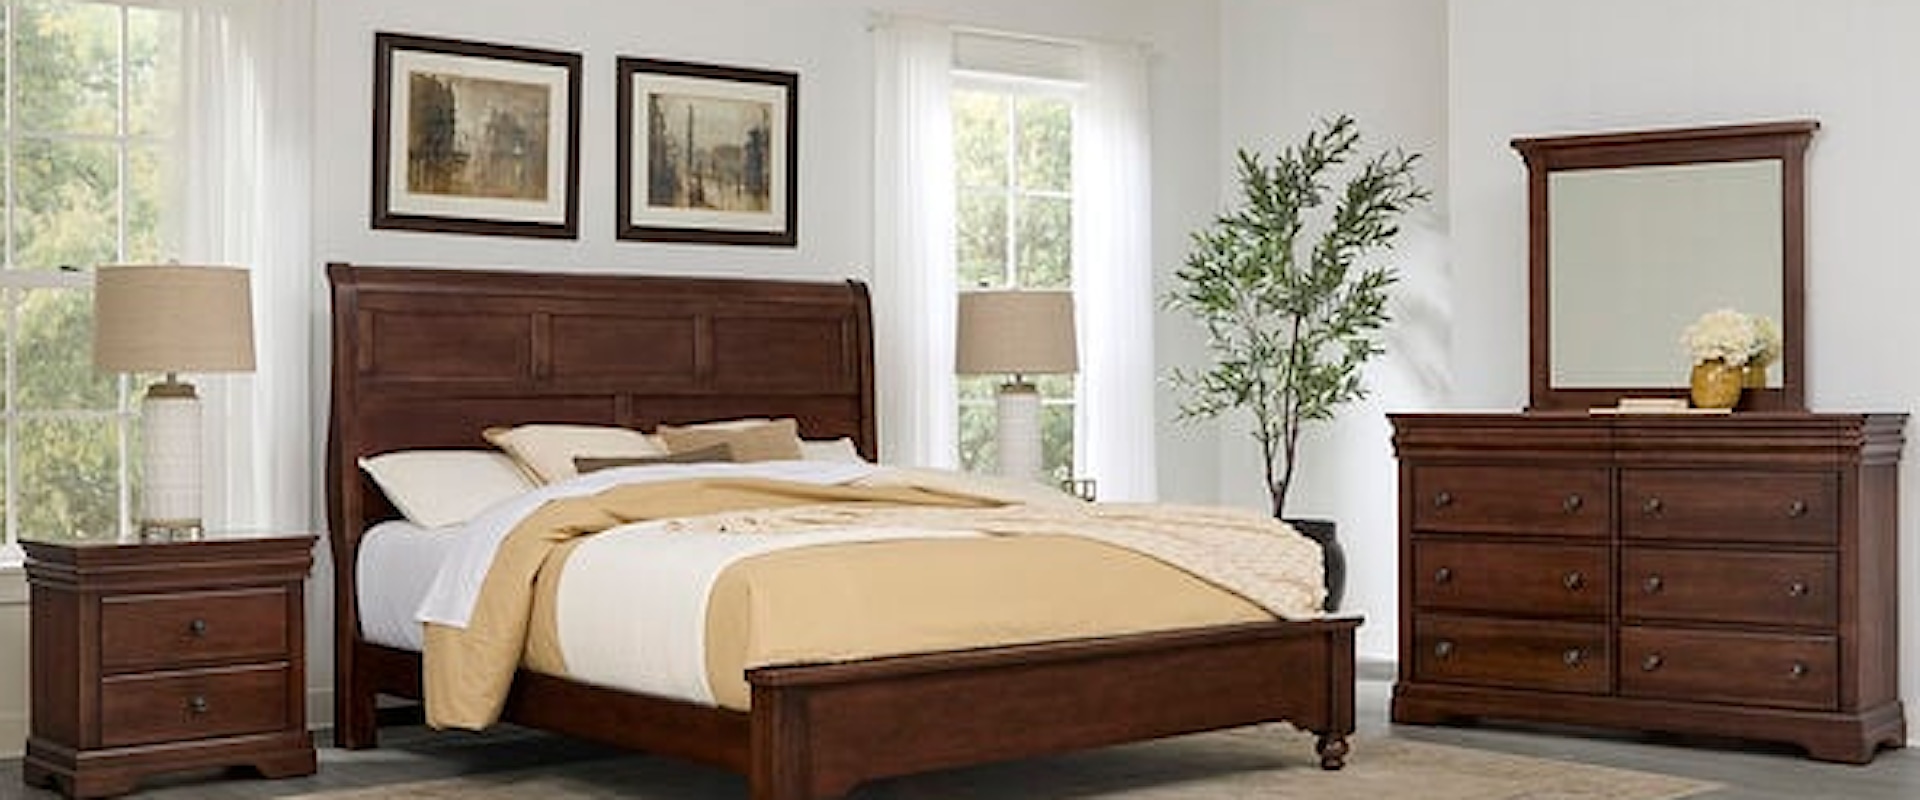 Transitional King Sleigh Bedroom Warm Cherry